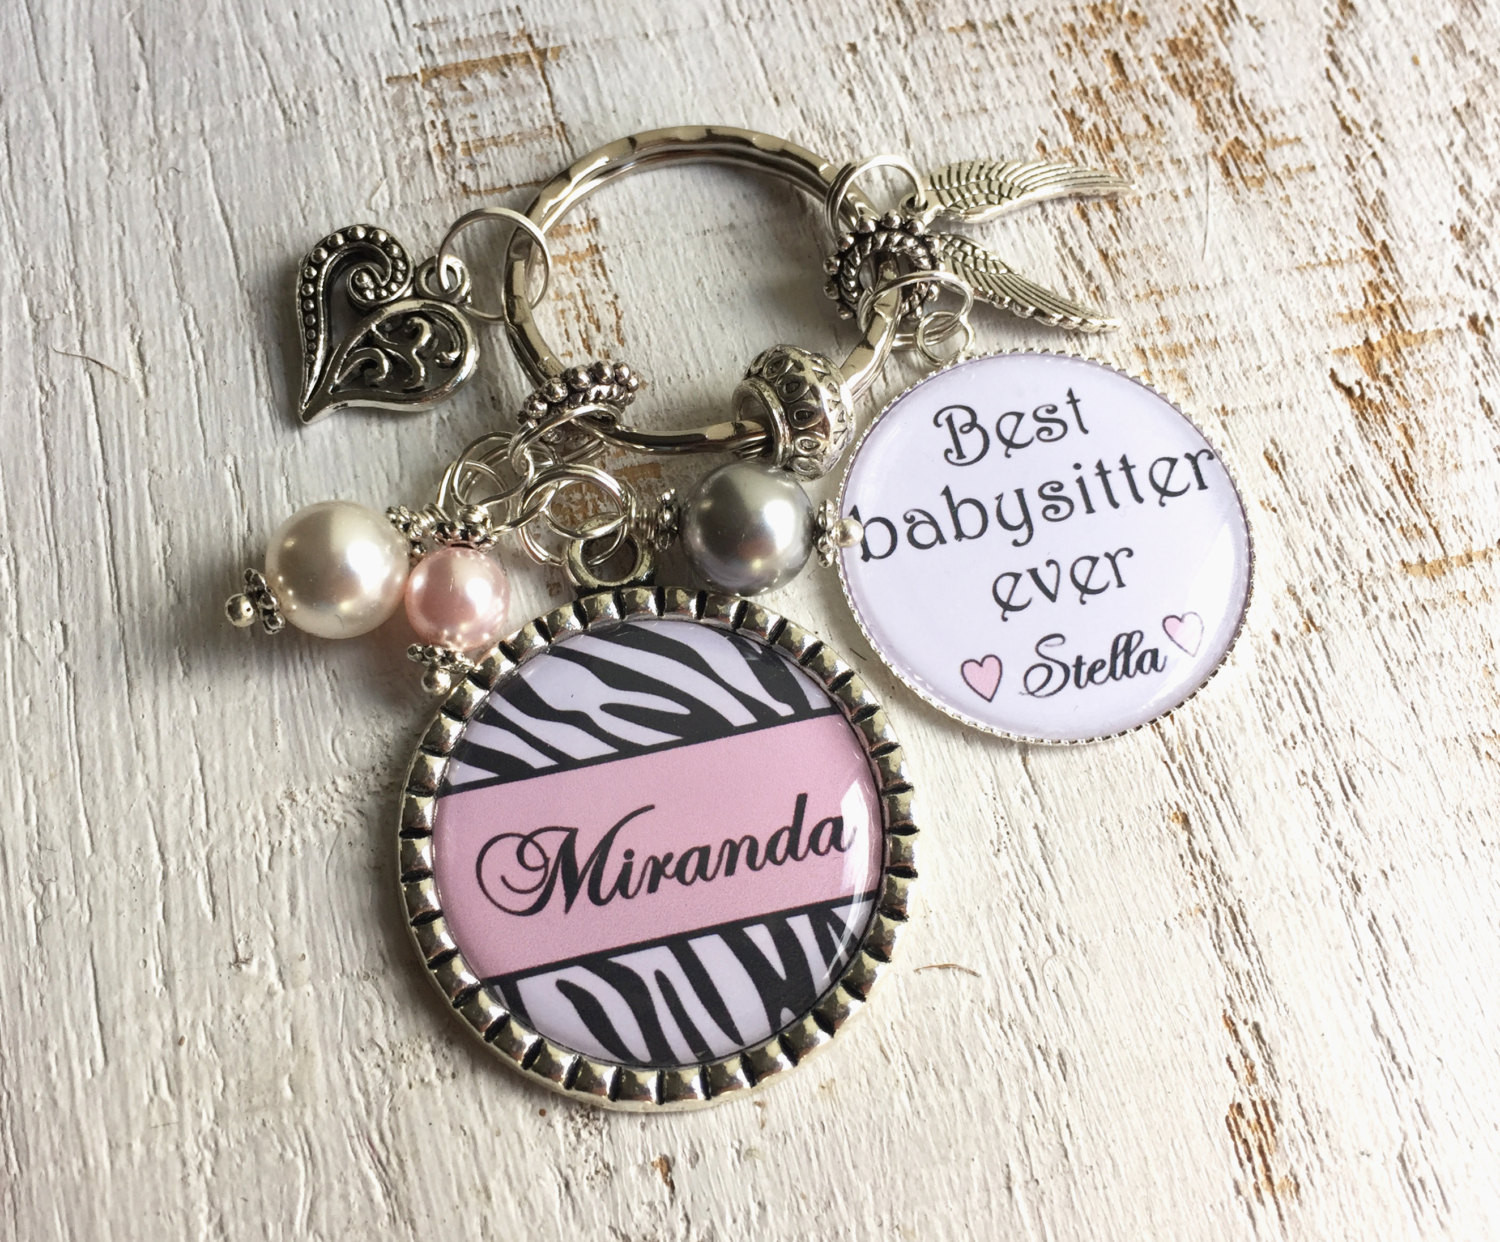 Gift Ideas For Babysitter
 Babysitter Gift Nanny Gift Ideas PERSONALIZED Keychain or